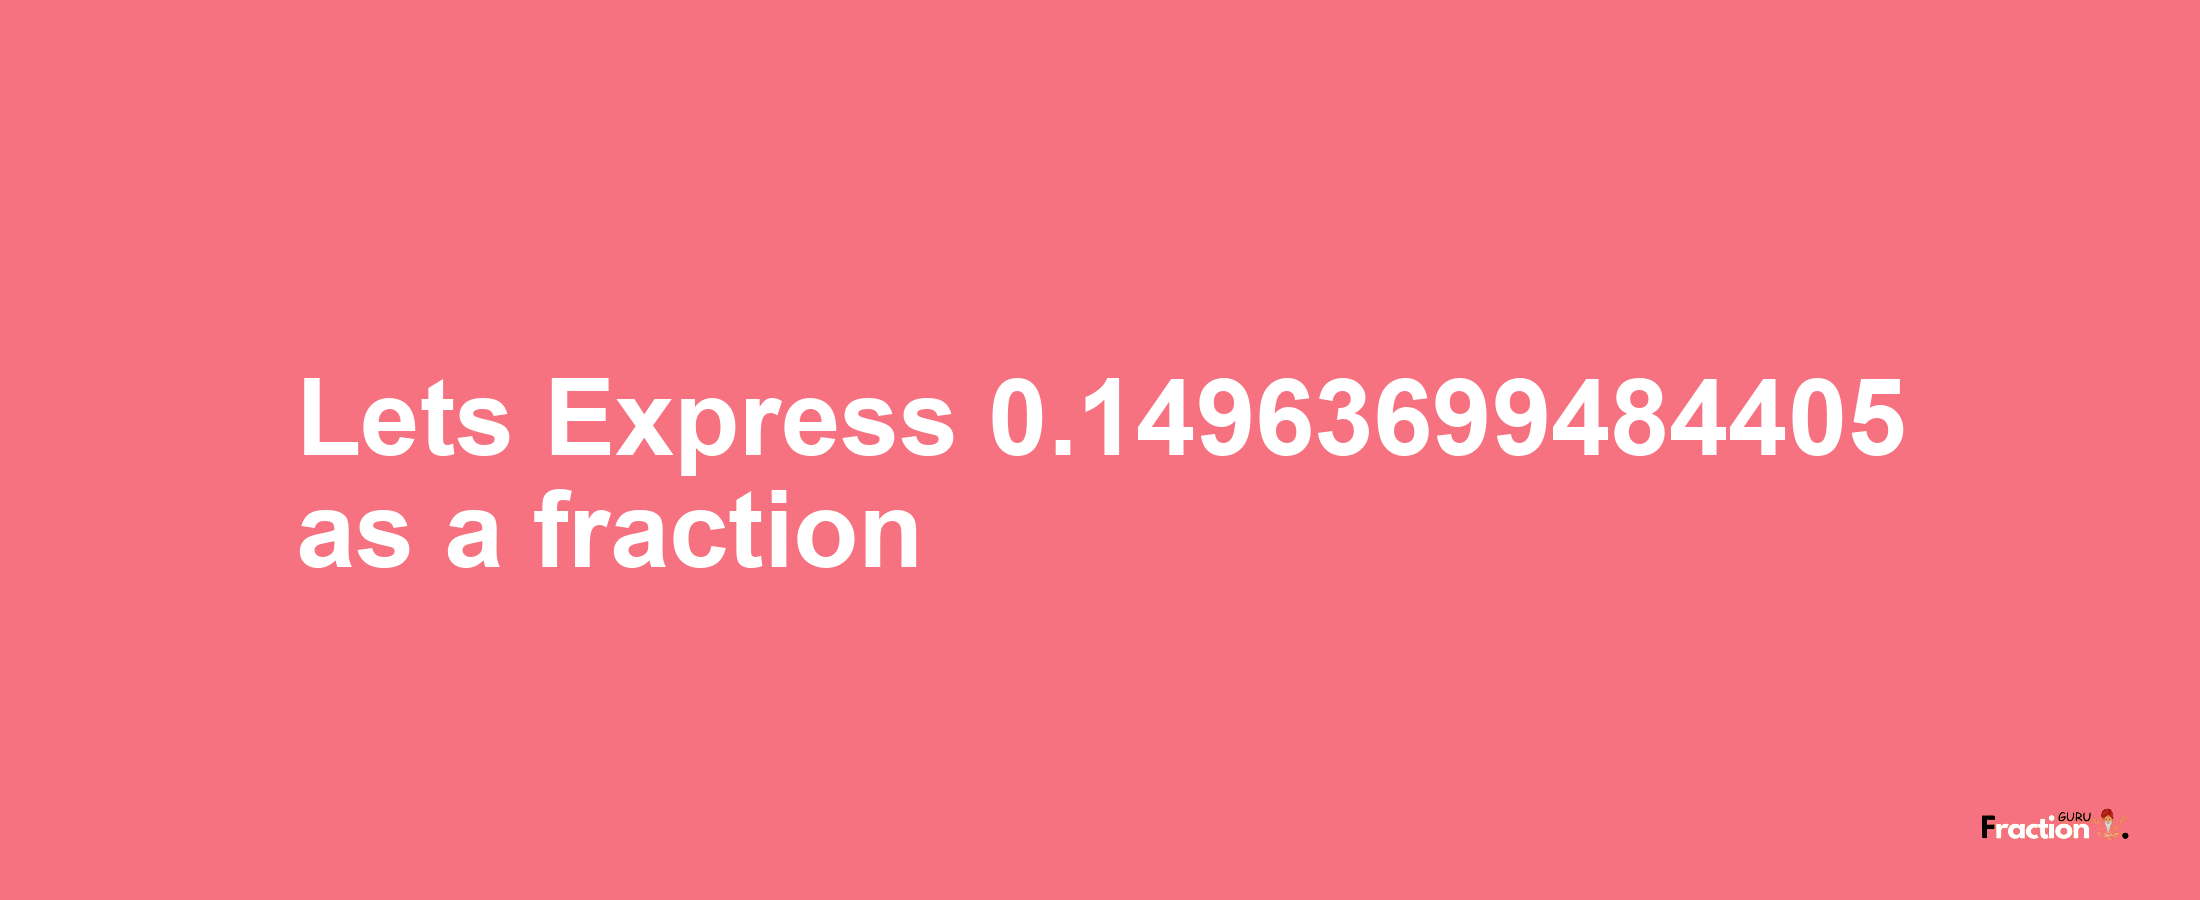 Lets Express 0.14963699484405 as afraction